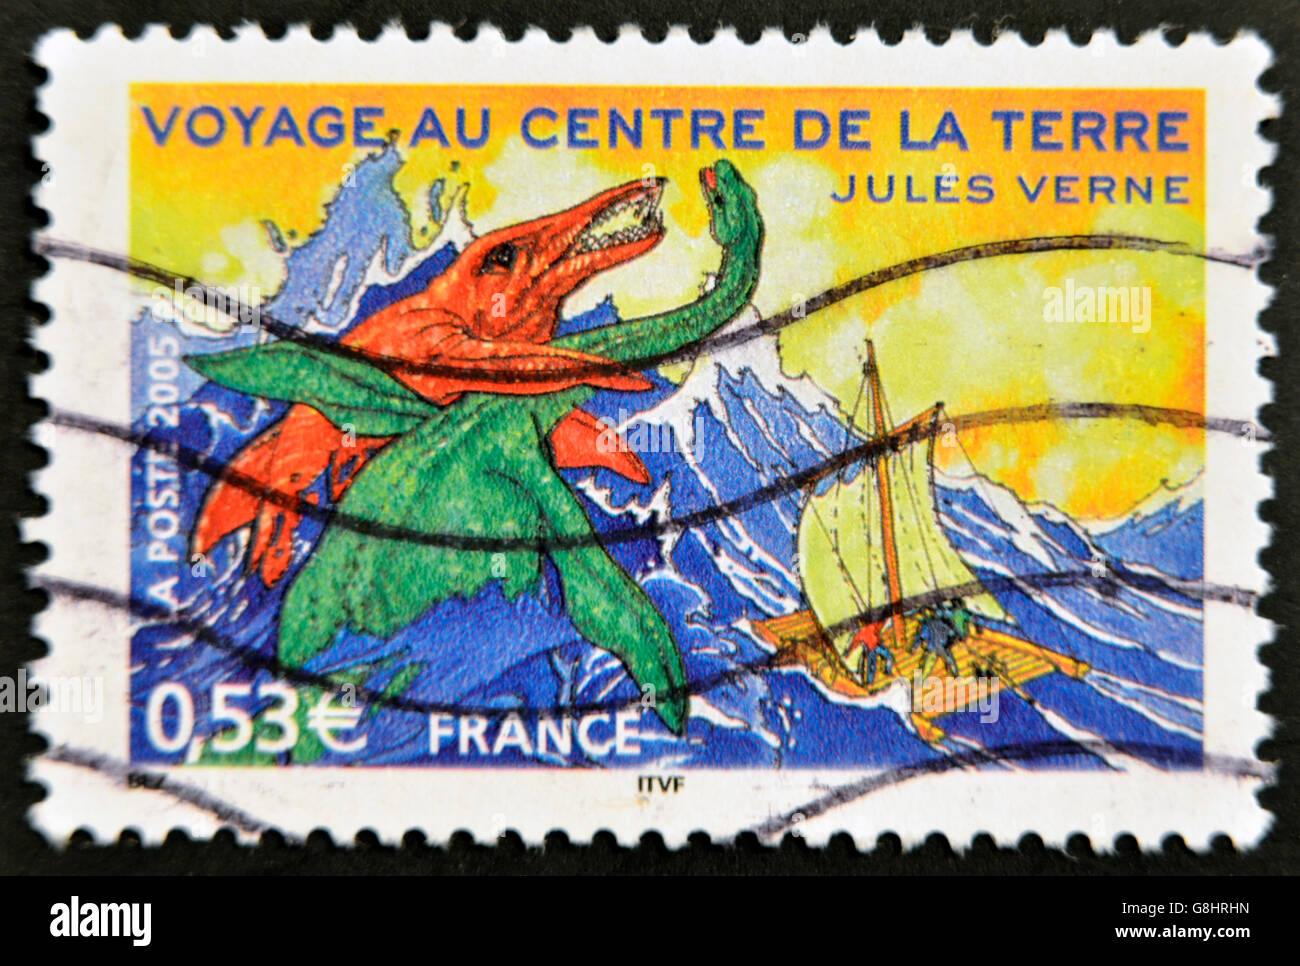 FRANCE - CIRCA 2005: A stamp printed in France shows an image of 'Journey to the Center of the Earth,' a novel by Jules Verne, c Stock Photo